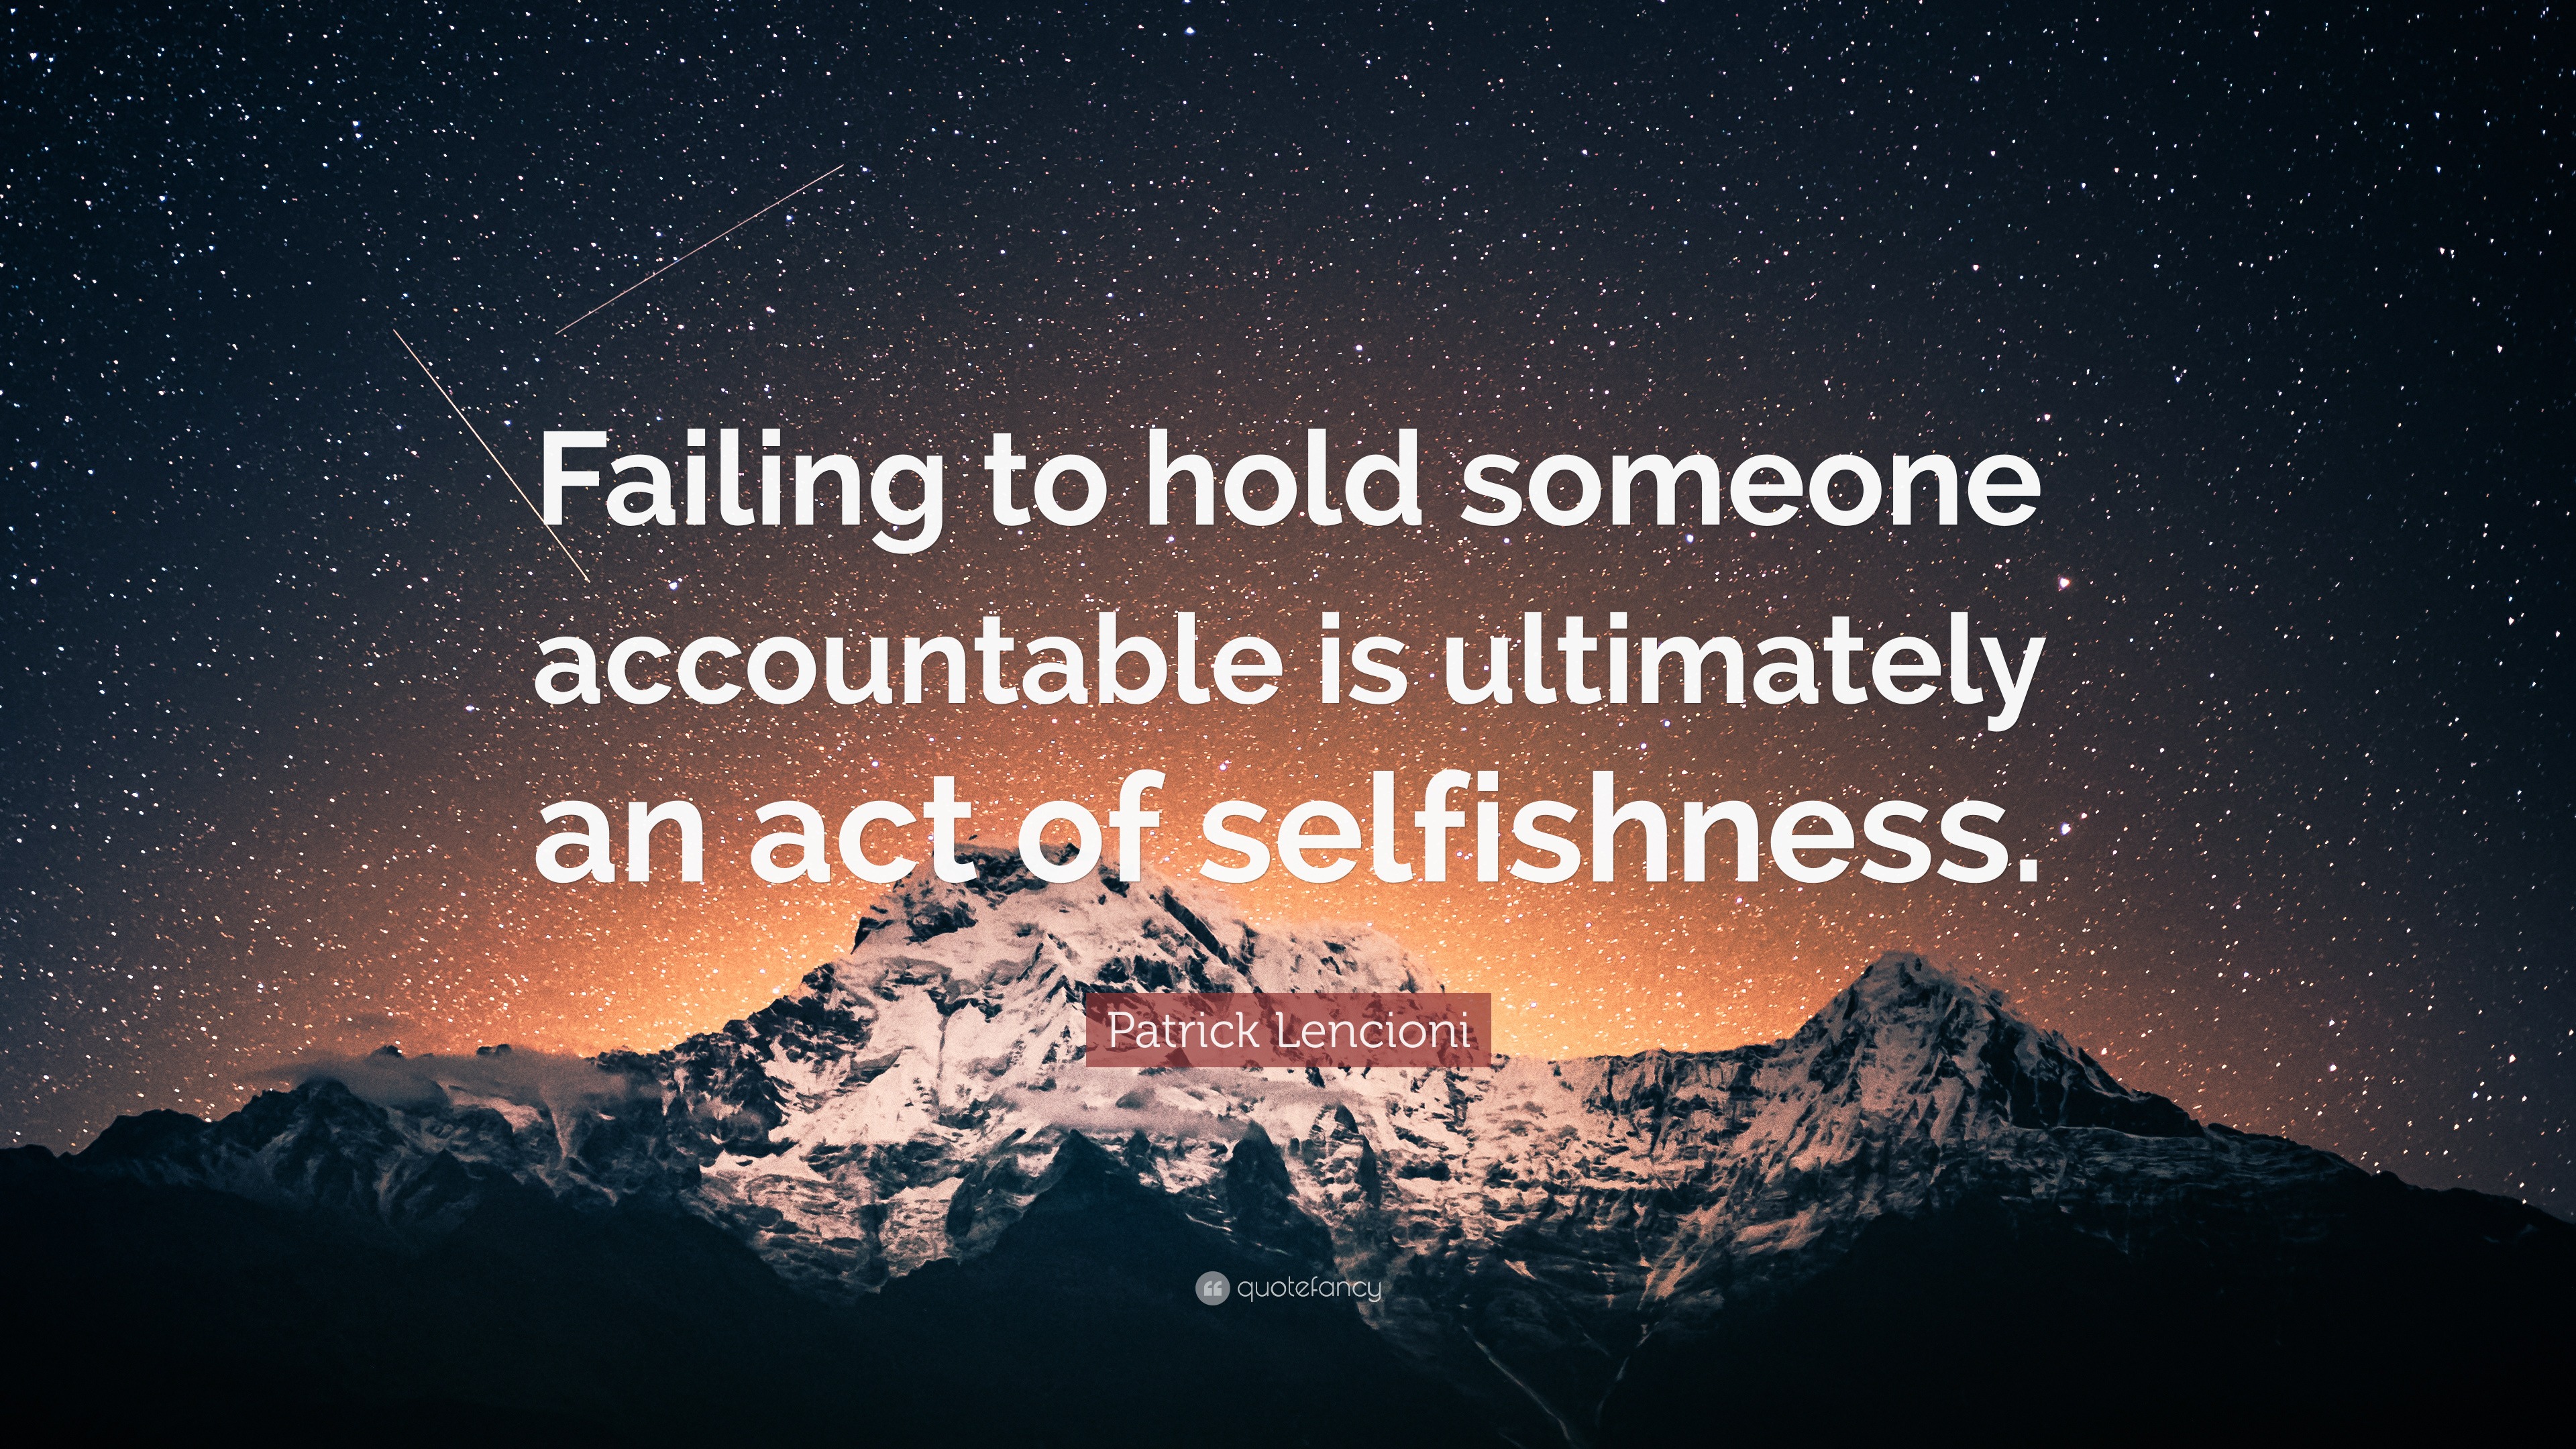 Patrick Lencioni Quote: “Failing to hold someone accountable is ...